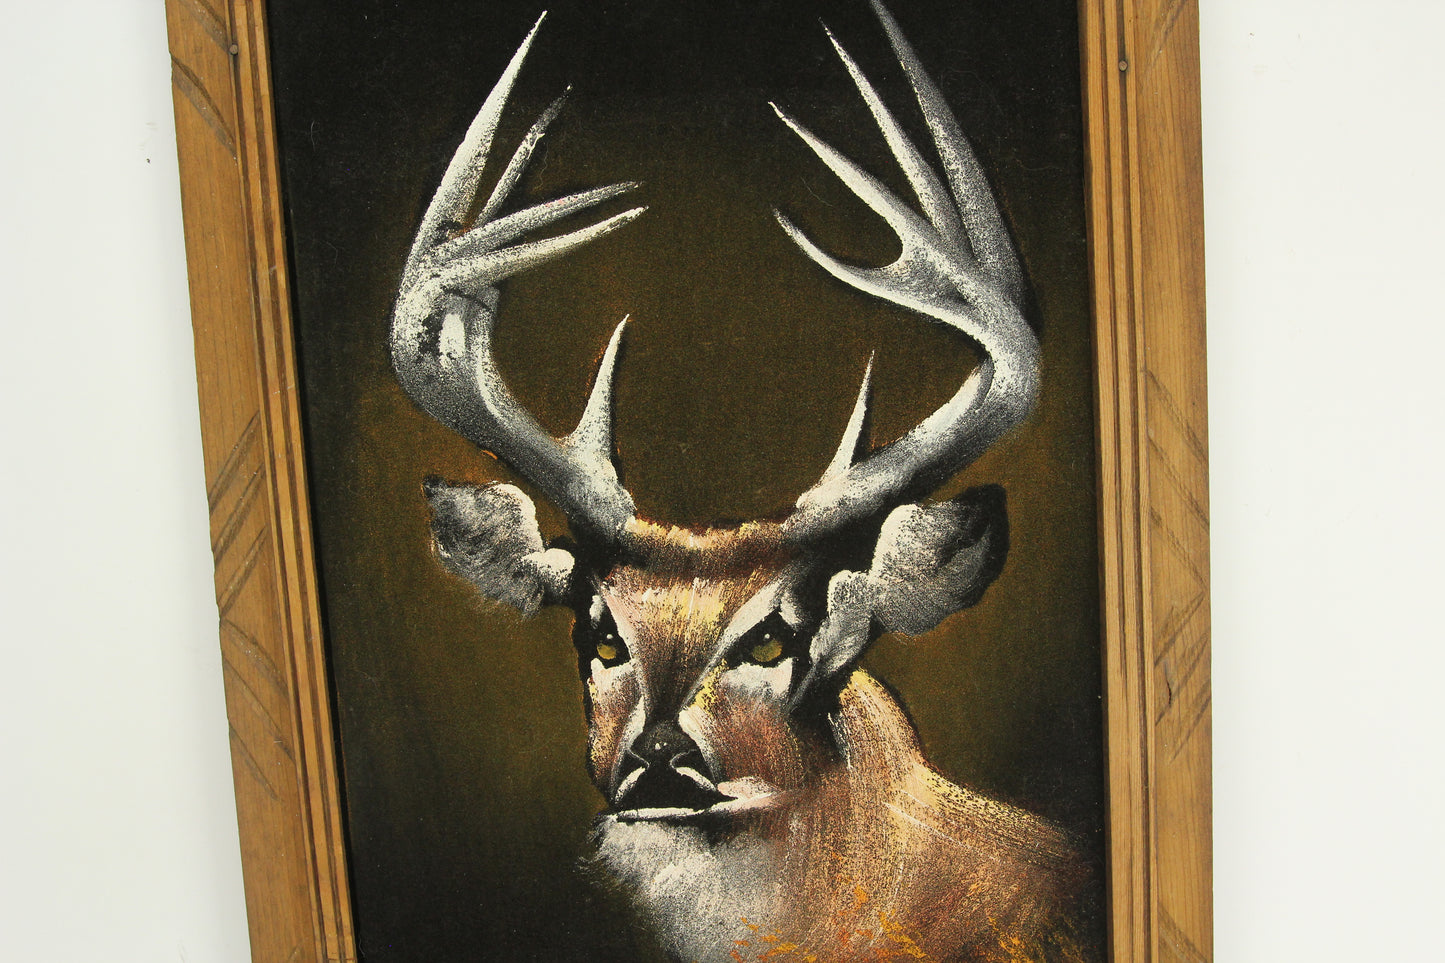 Framed Velvet Painting of a Stag Buck Deer, Made in Mexico - 14 x 22.5"